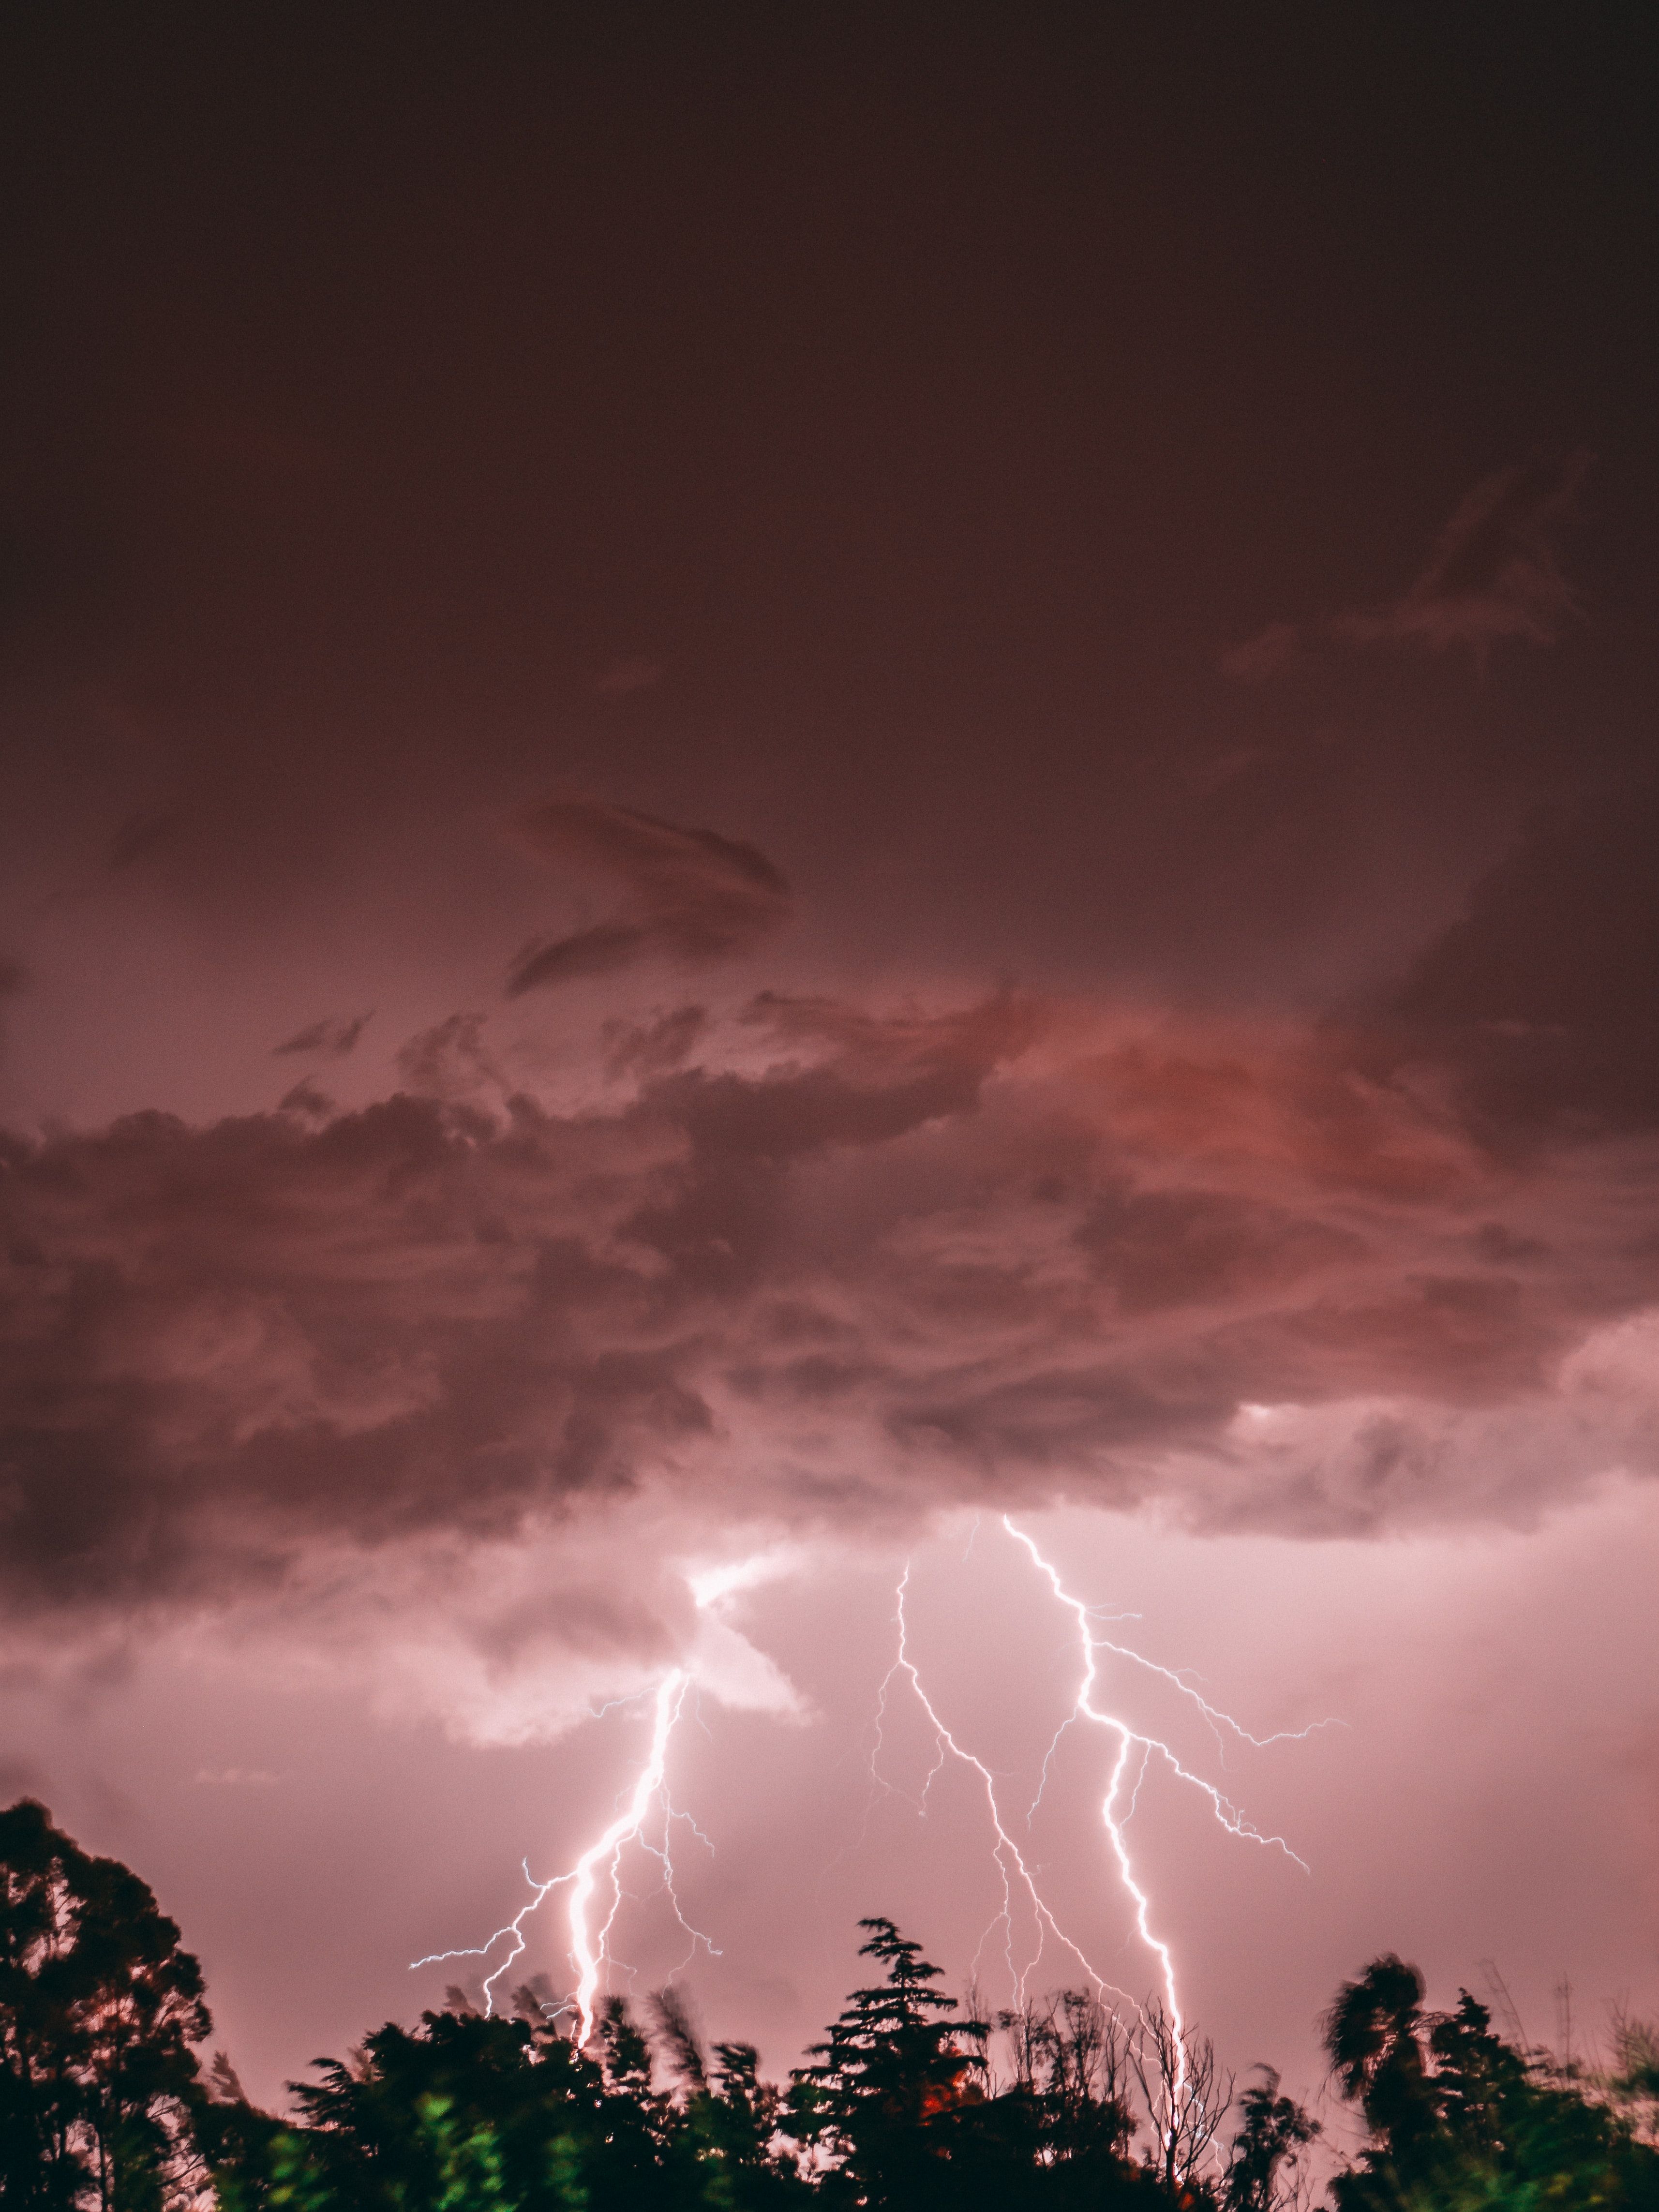 A bolt of lightning strikes in the sky - Storm